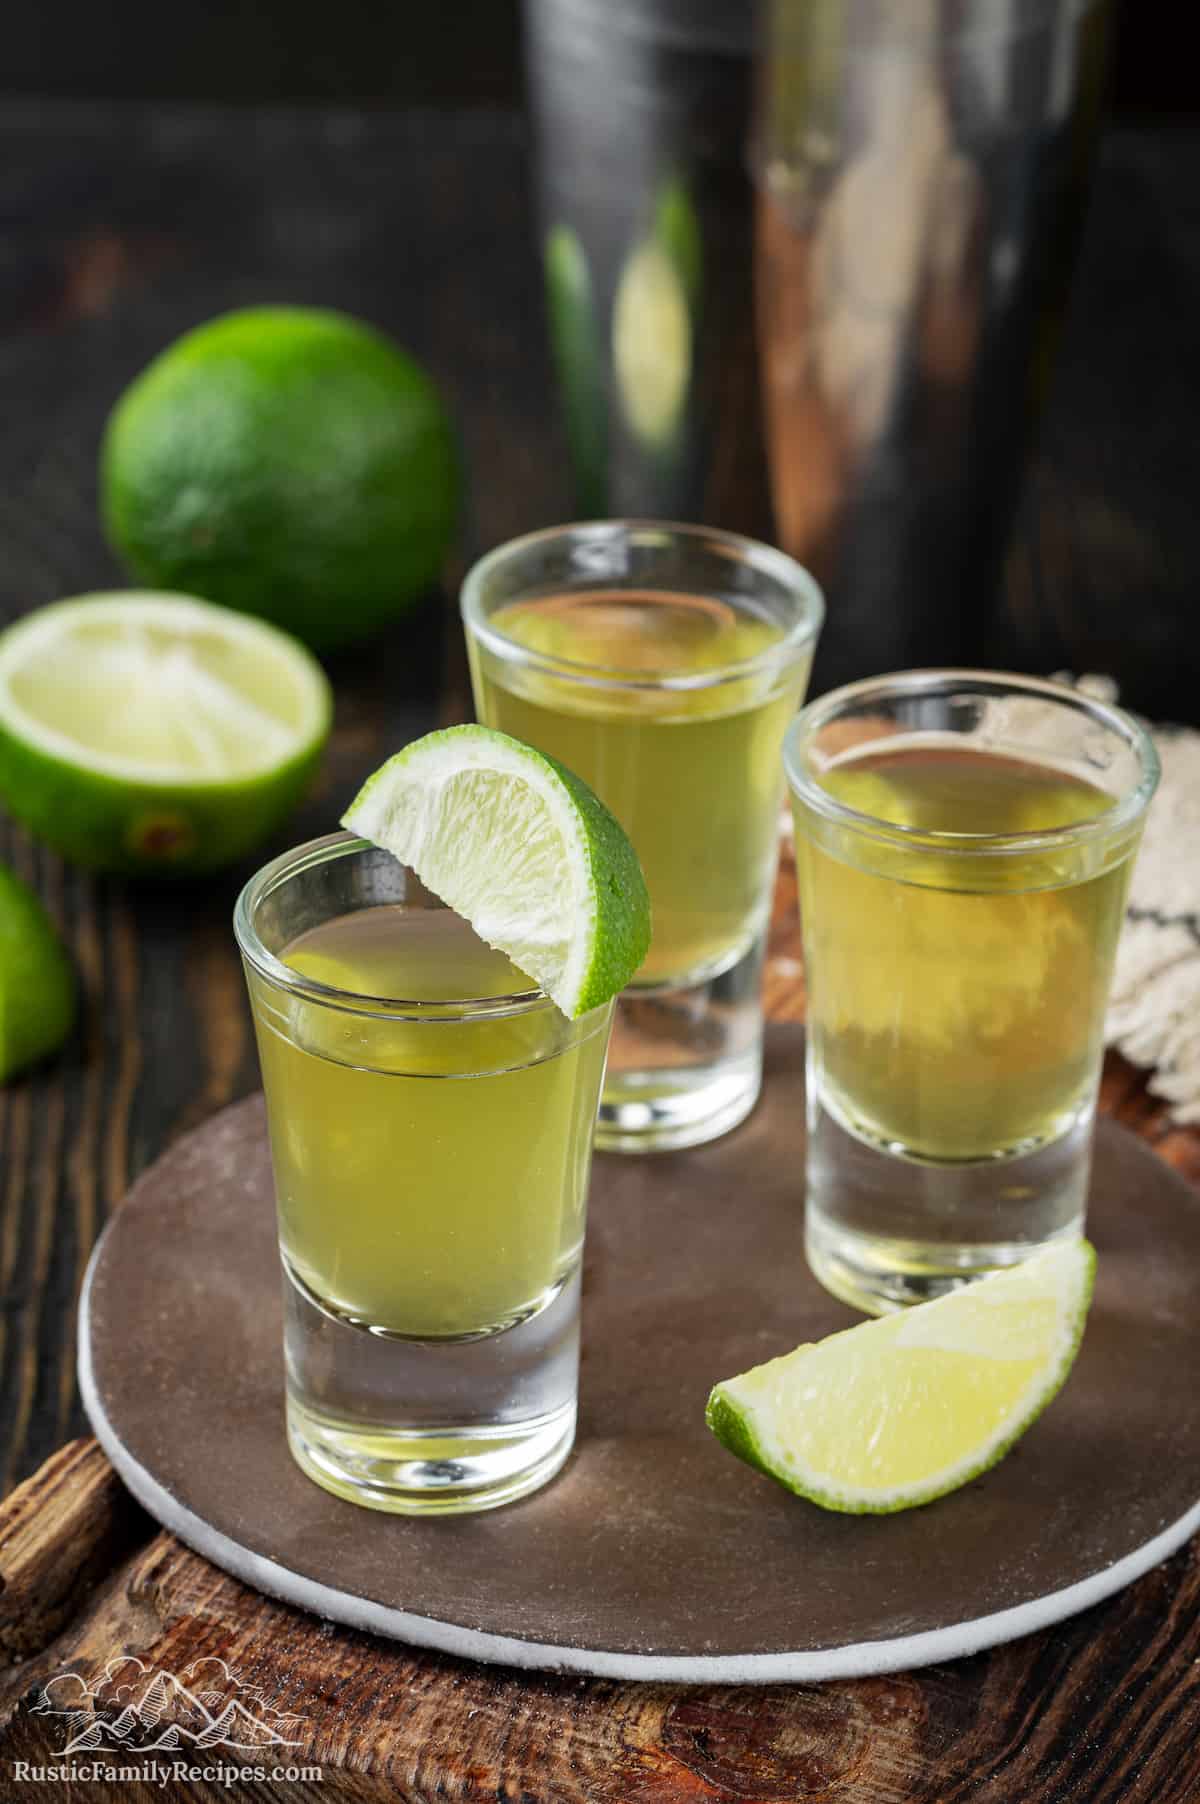 Three shot glasses filled with a green tea shot, with lime wedges